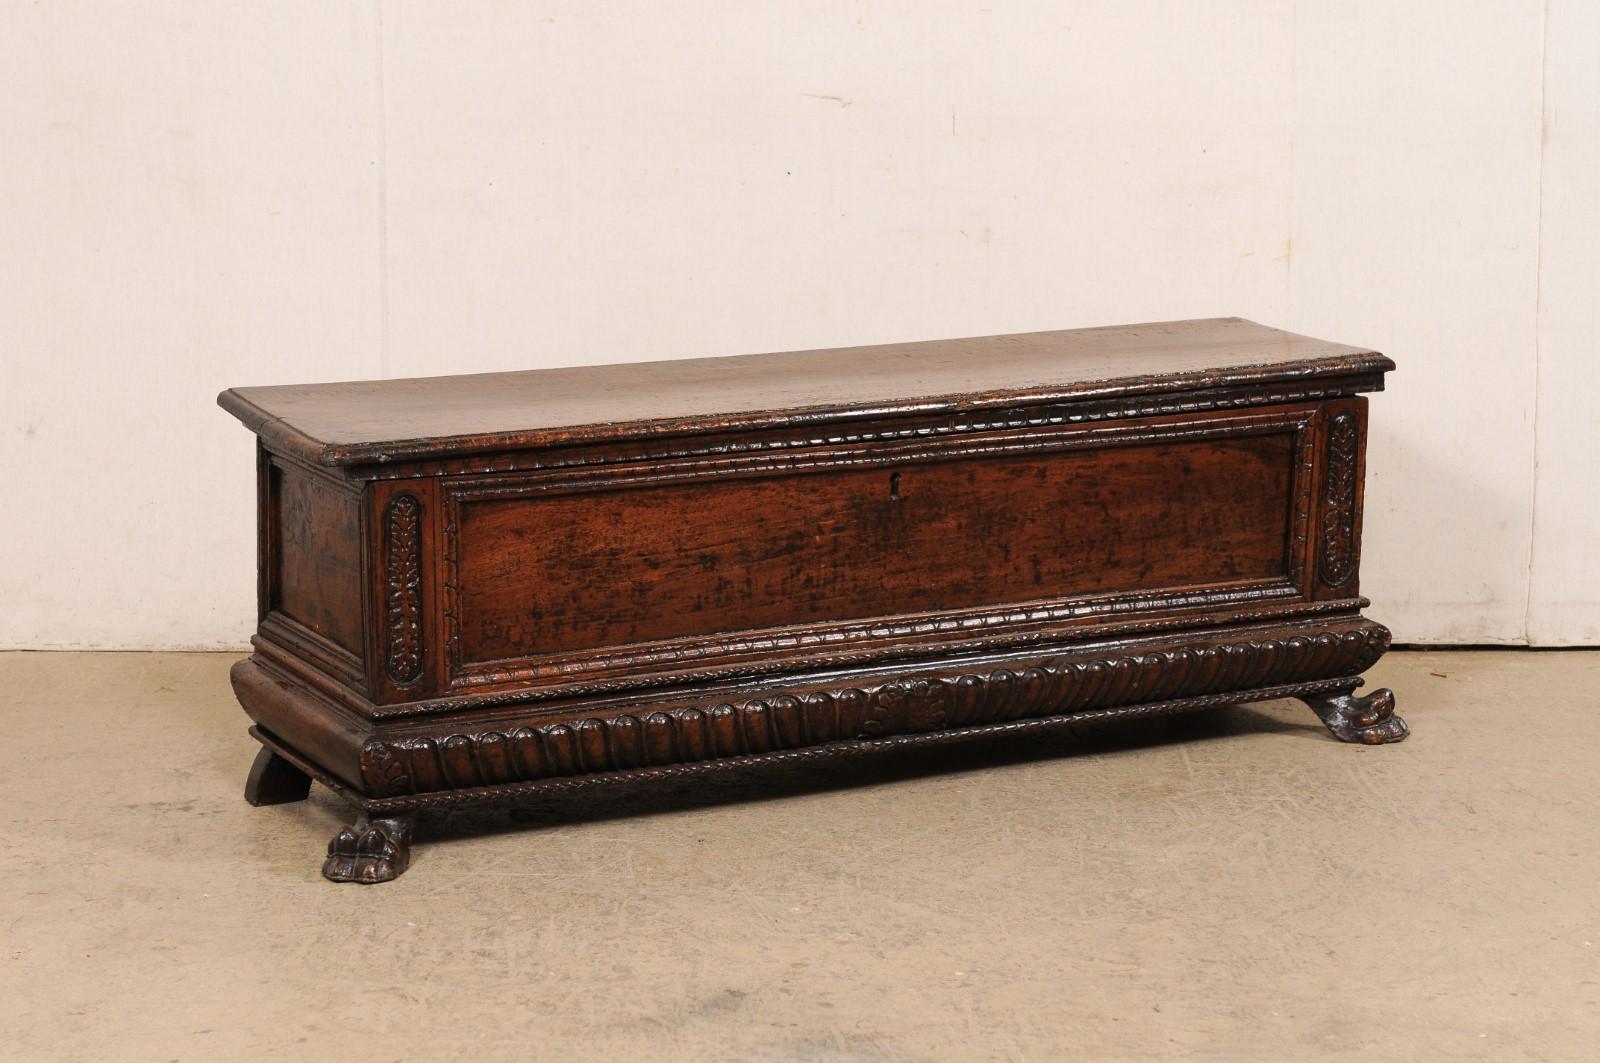 An Italian carved-wood cassone bench with storage from the 18th century. This antique seating bench from Italy has a recessed panel design and front and both short sides; adorn in thickly carved trim and molding with raised oval-shaped foliate